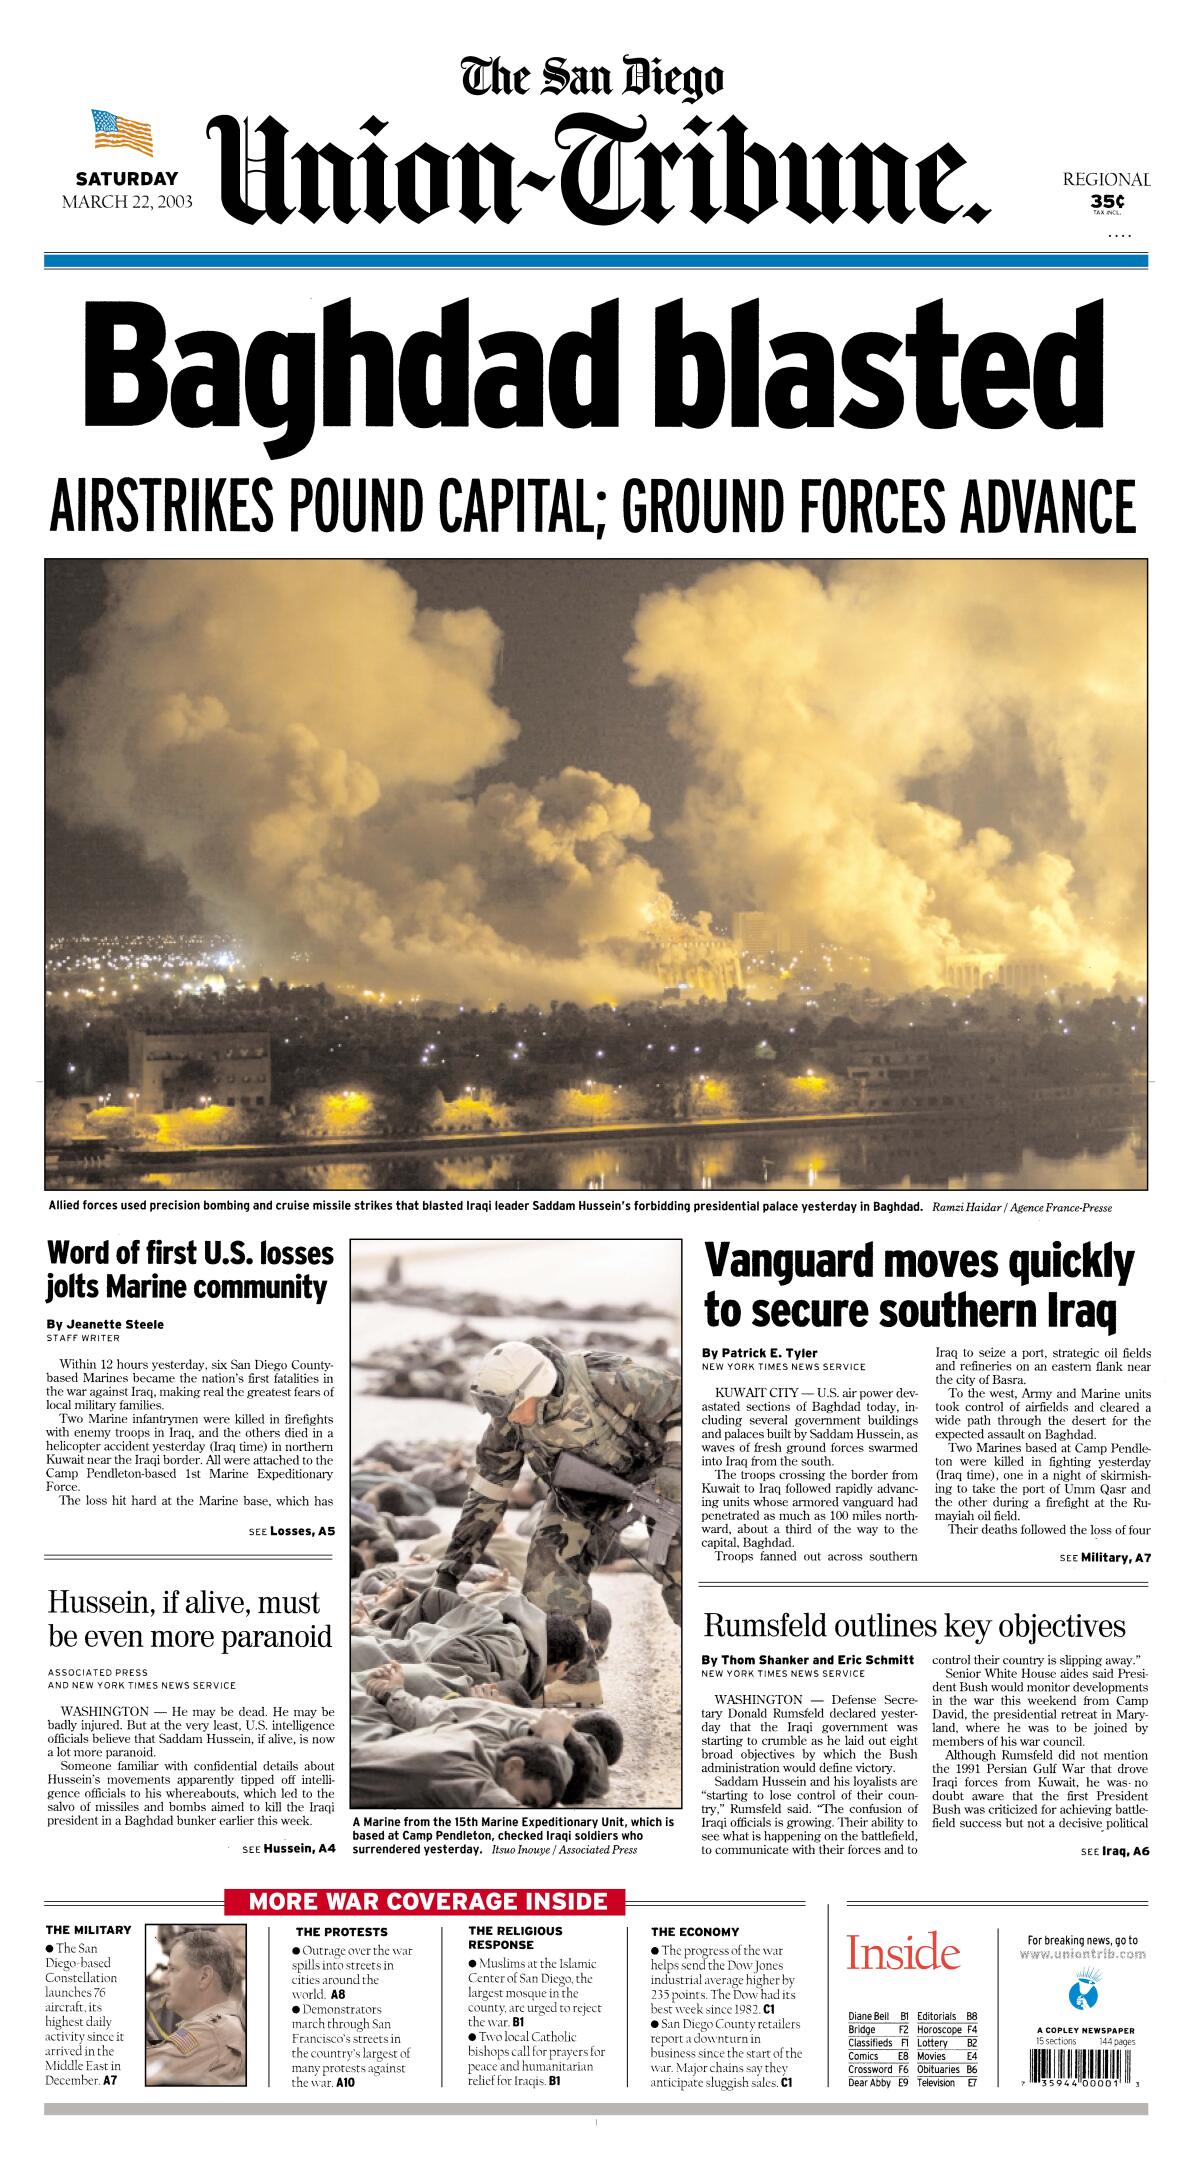 Front page of The San Diego Union-Tribune, Saturday, March 22, 2003.